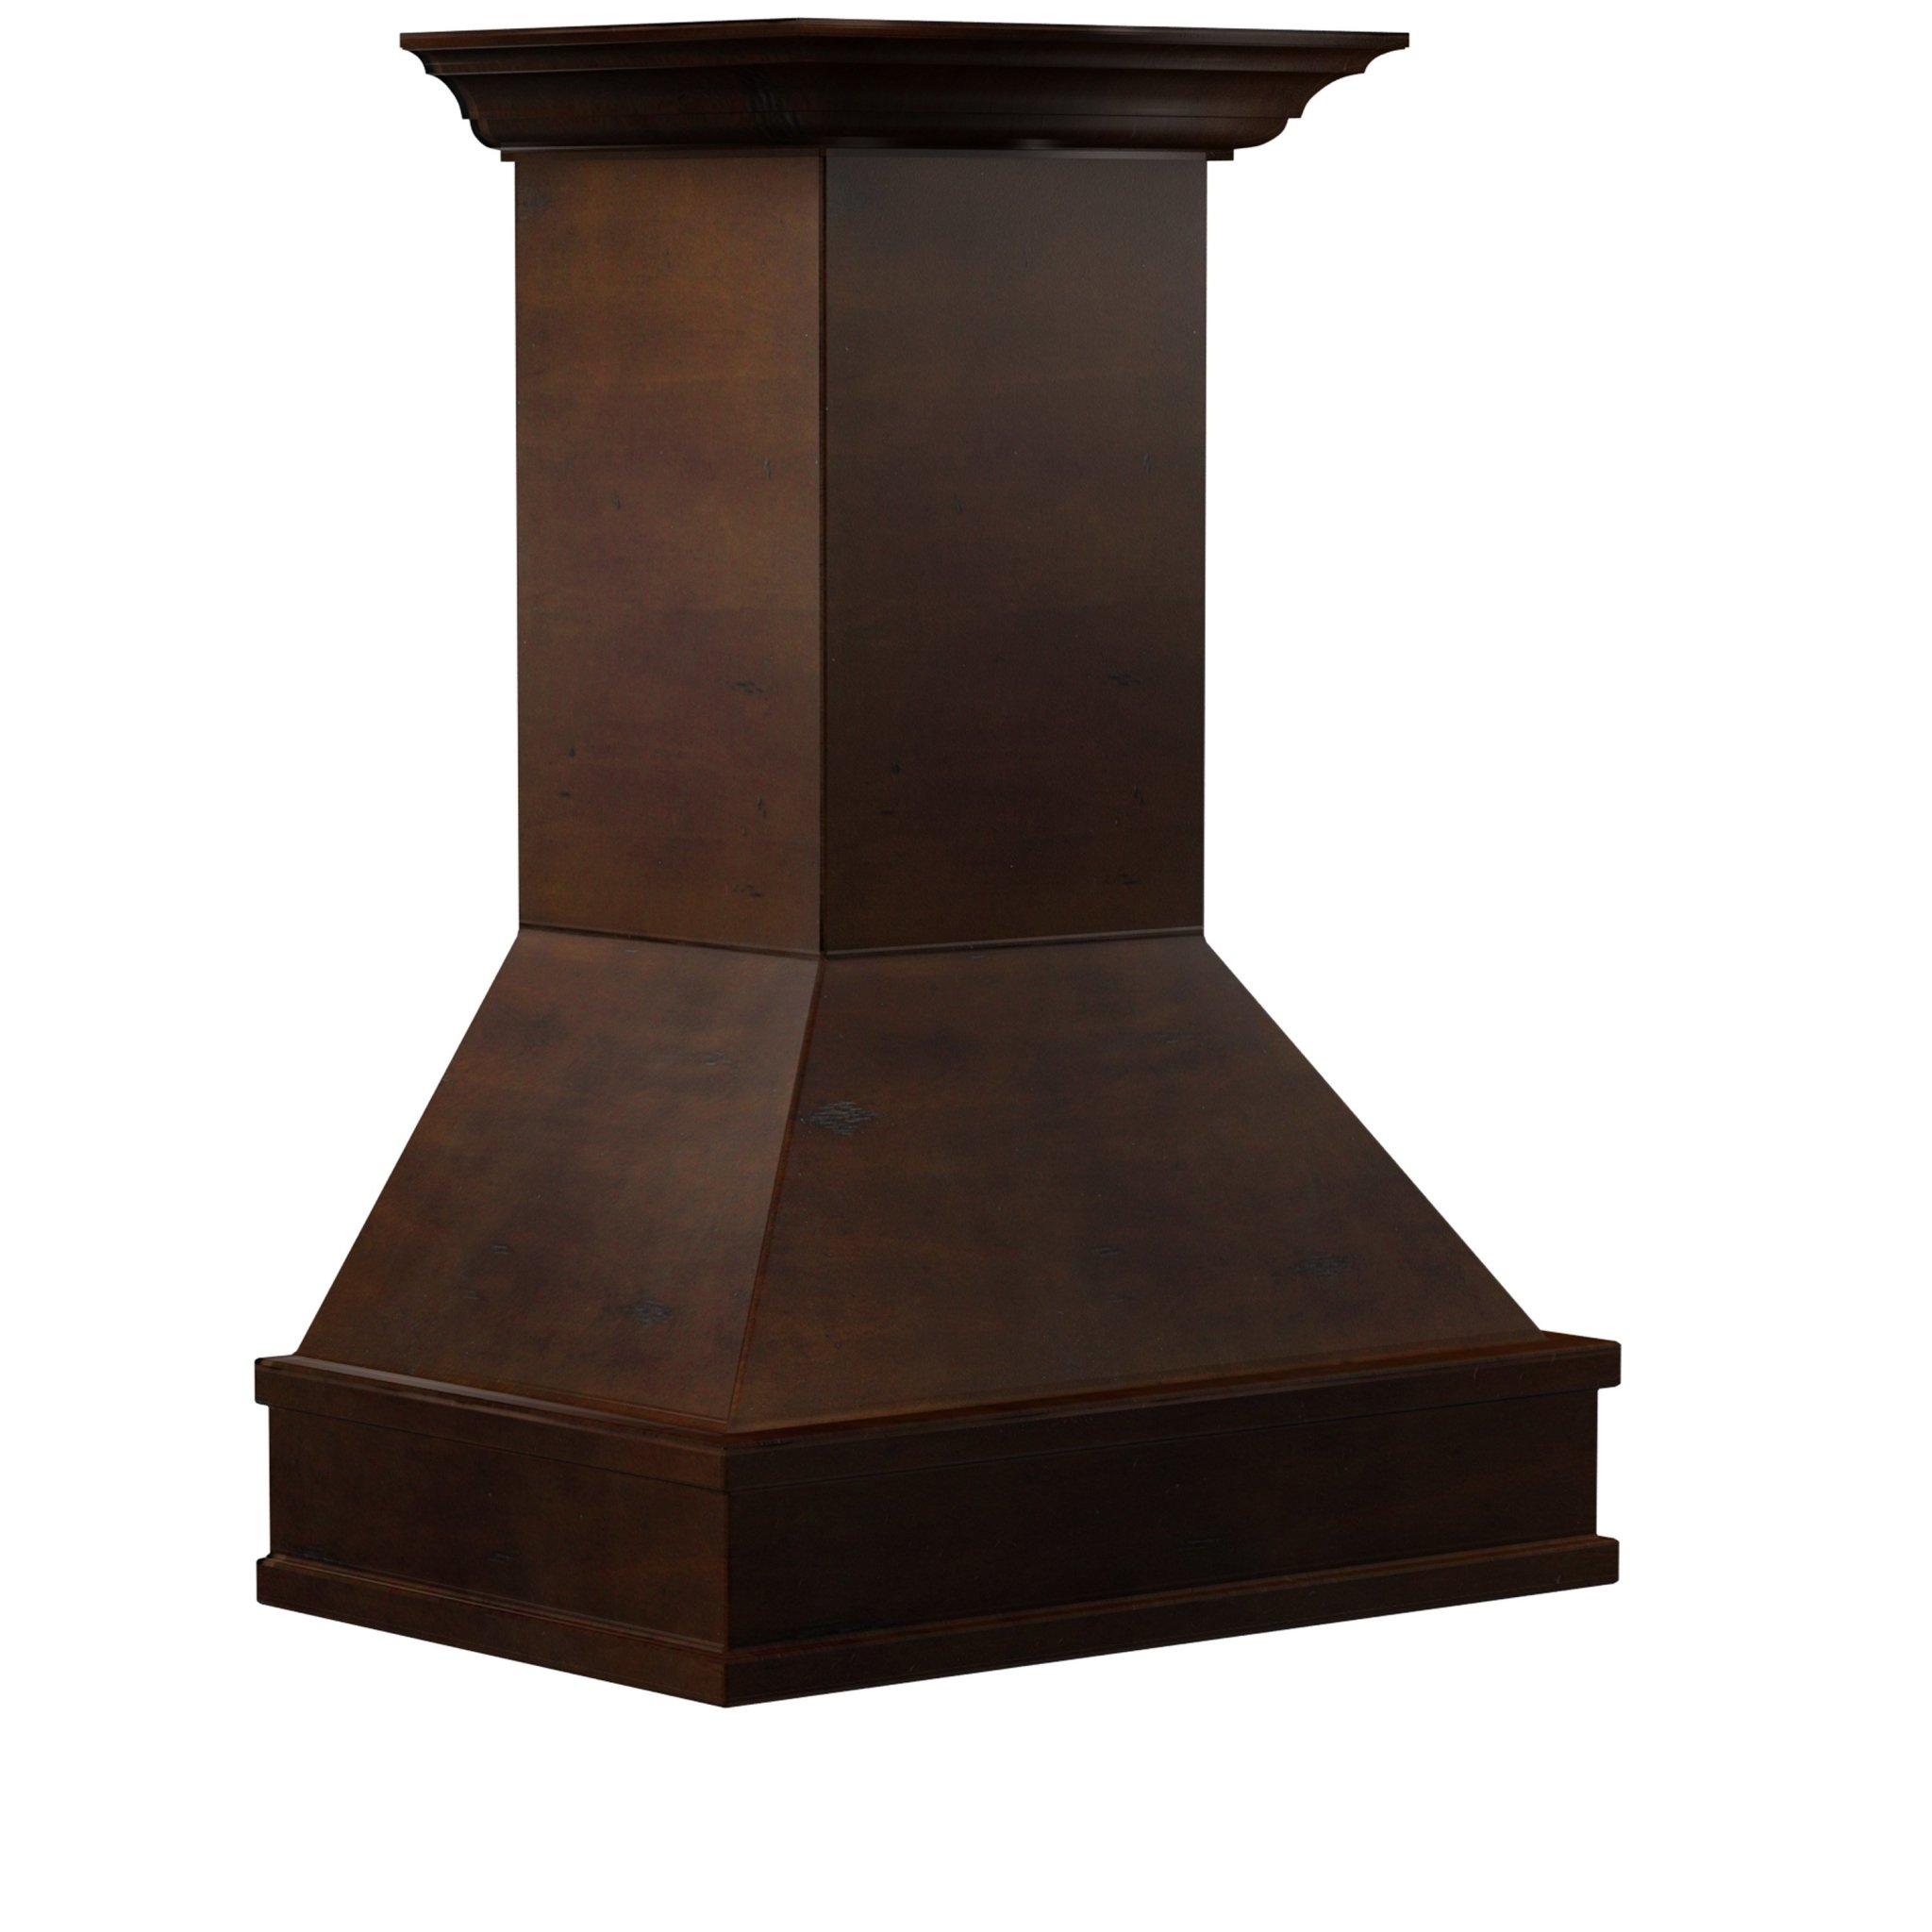 ZLINE KITCHEN AND BATH 329WHRD30 ZLINE 36" Wooden Wall Mount Range Hood in Walnut and Hamilton - Includes Dual Remote Motor Size: 30 Inch, CFM: 700